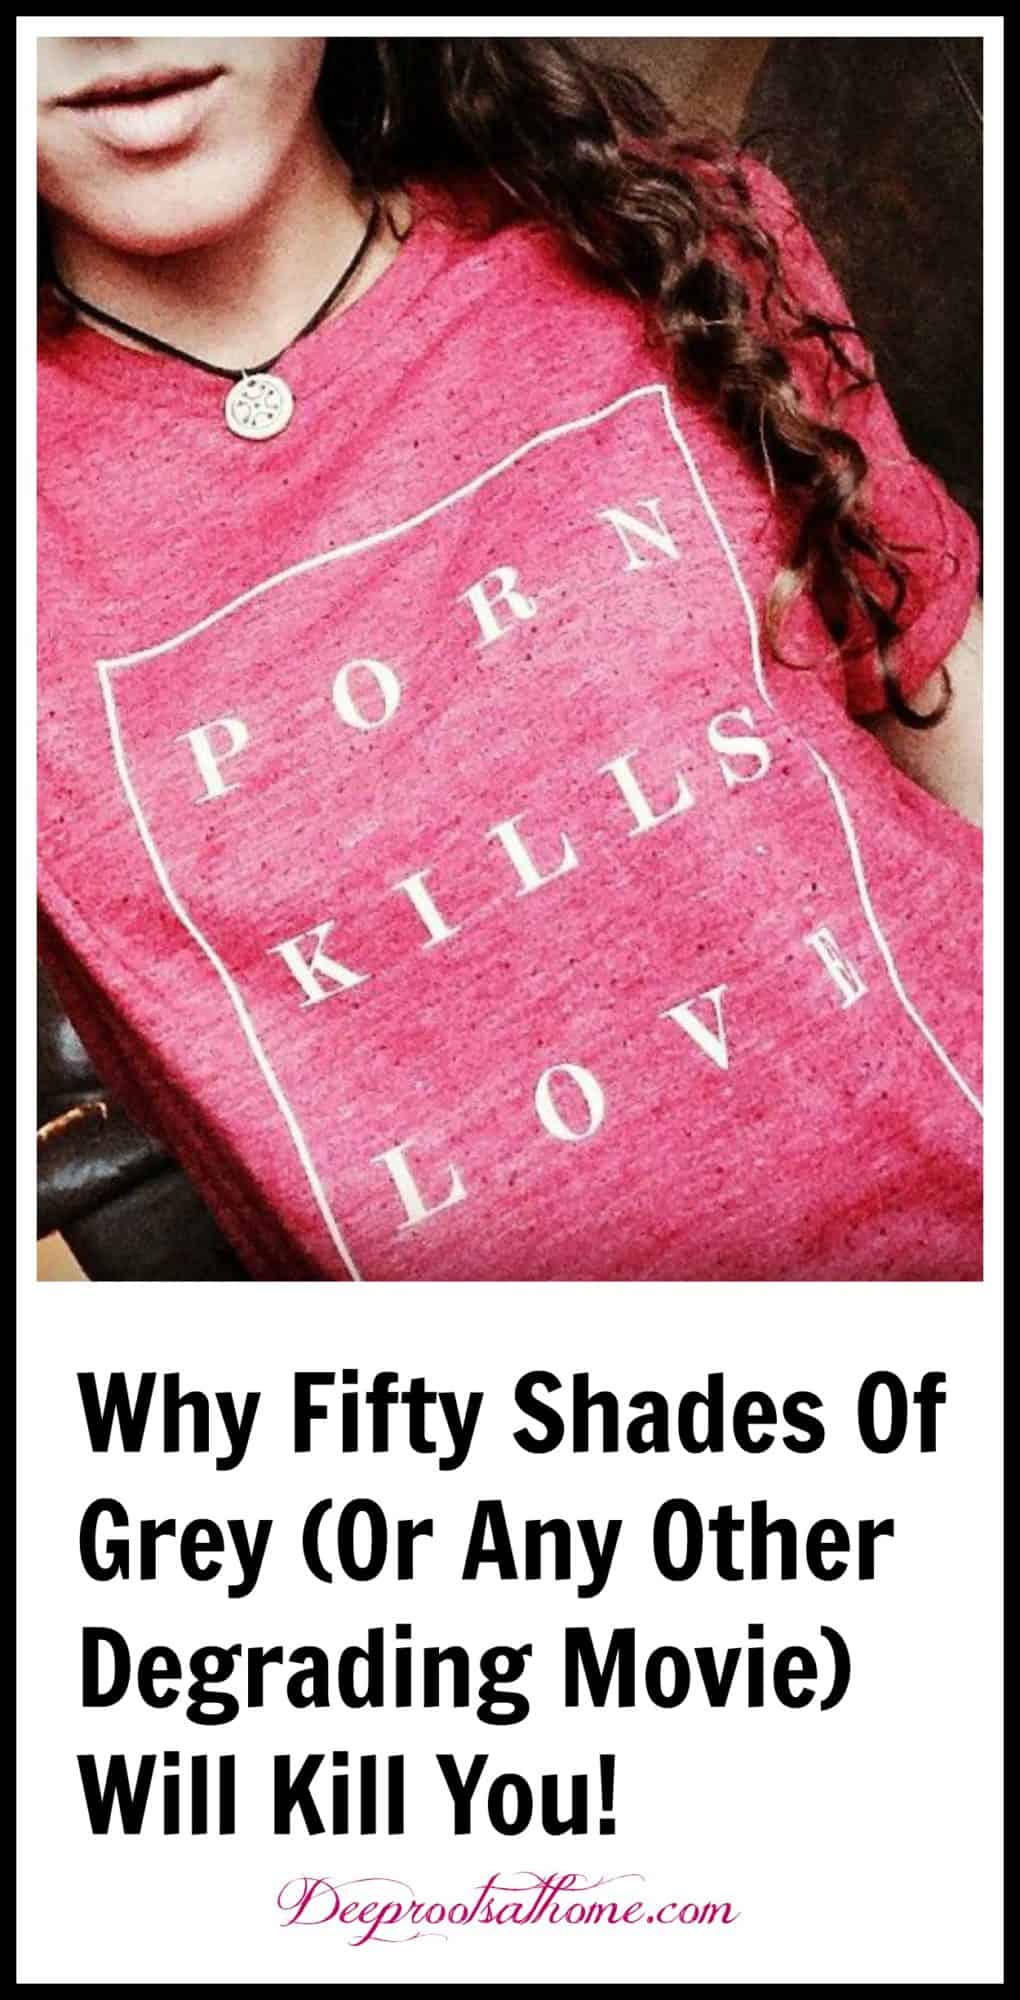 Why Fifty Shades of Grey (Or Any Other Degrading Movie) Will Kill You, Old Fashioned the movie, alternative, bogus, fake, love story, men, women, encouragement, Christian values, false expectations, sound mind, trap, our children, sons, daughters, bad company, corrupt thinking, false, counterfeit, forged, fraudulent, sham, artificial, imitation, simulated, feigned, deceptive, misleading, movie review, Dominique Strauss-Kahn, Christian Grey, violence, Lies That Women Believe, quote, Matt Walsh blog, Romans 8:13, life, death, the flesh, the Spirit, prayer, discernment, power, God, purity, glamorize, spurious, definitions, dictionary, marriage, relationships, sin, Fandango, "R" rating, consequences, bible verses, entertainment, parenting, 